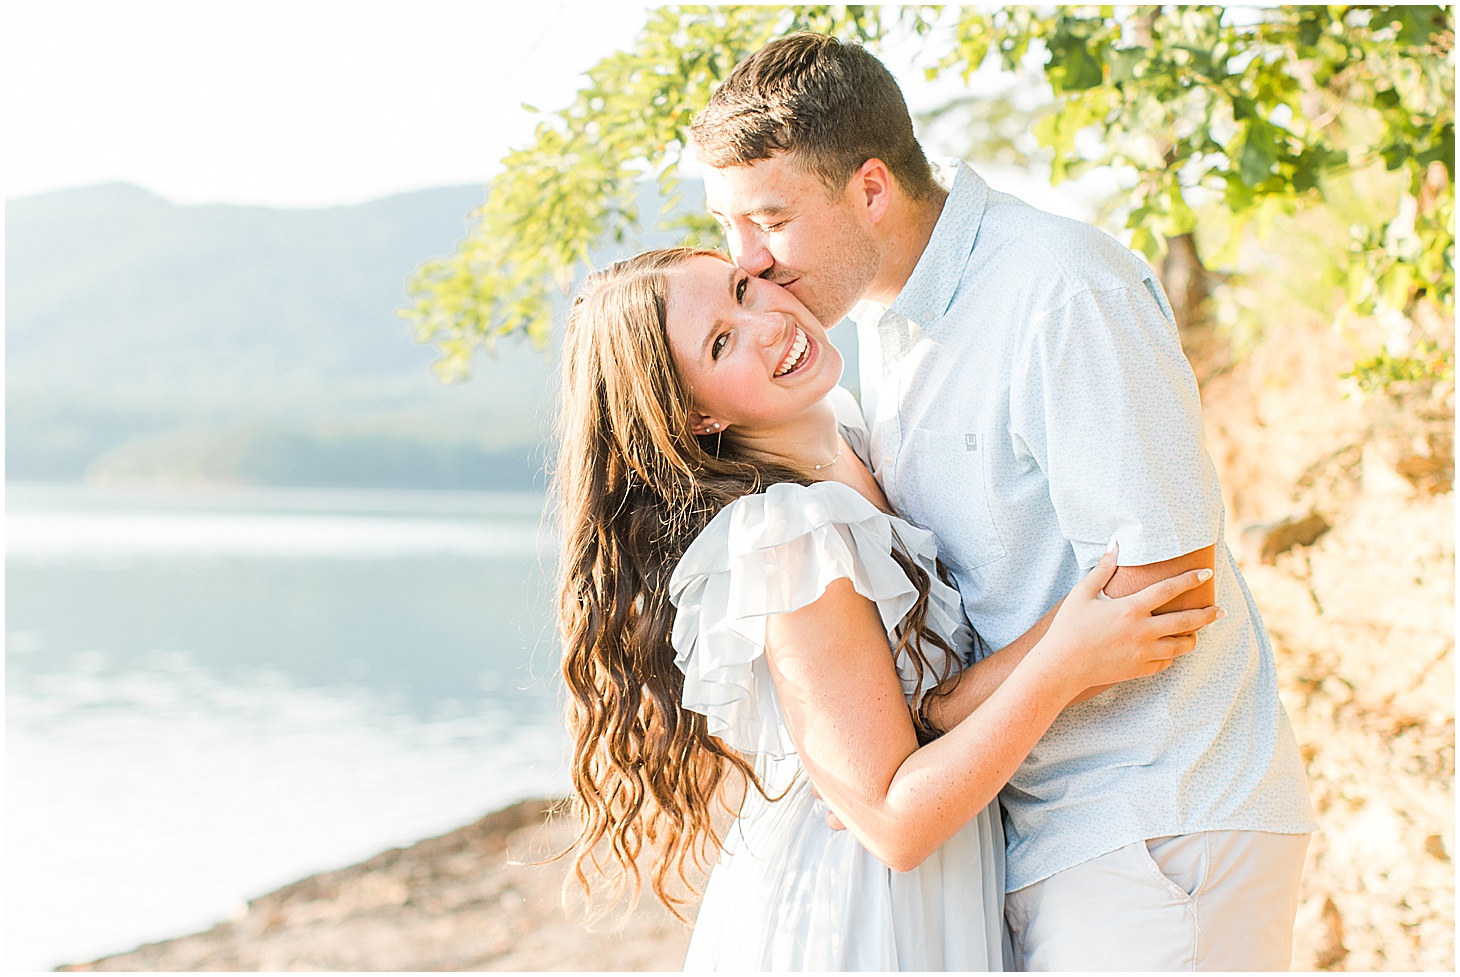 carvinscove_roanokeengagementsession_virginiaweddingphotographer_vaweddingphotographer_photo_0101.jpg